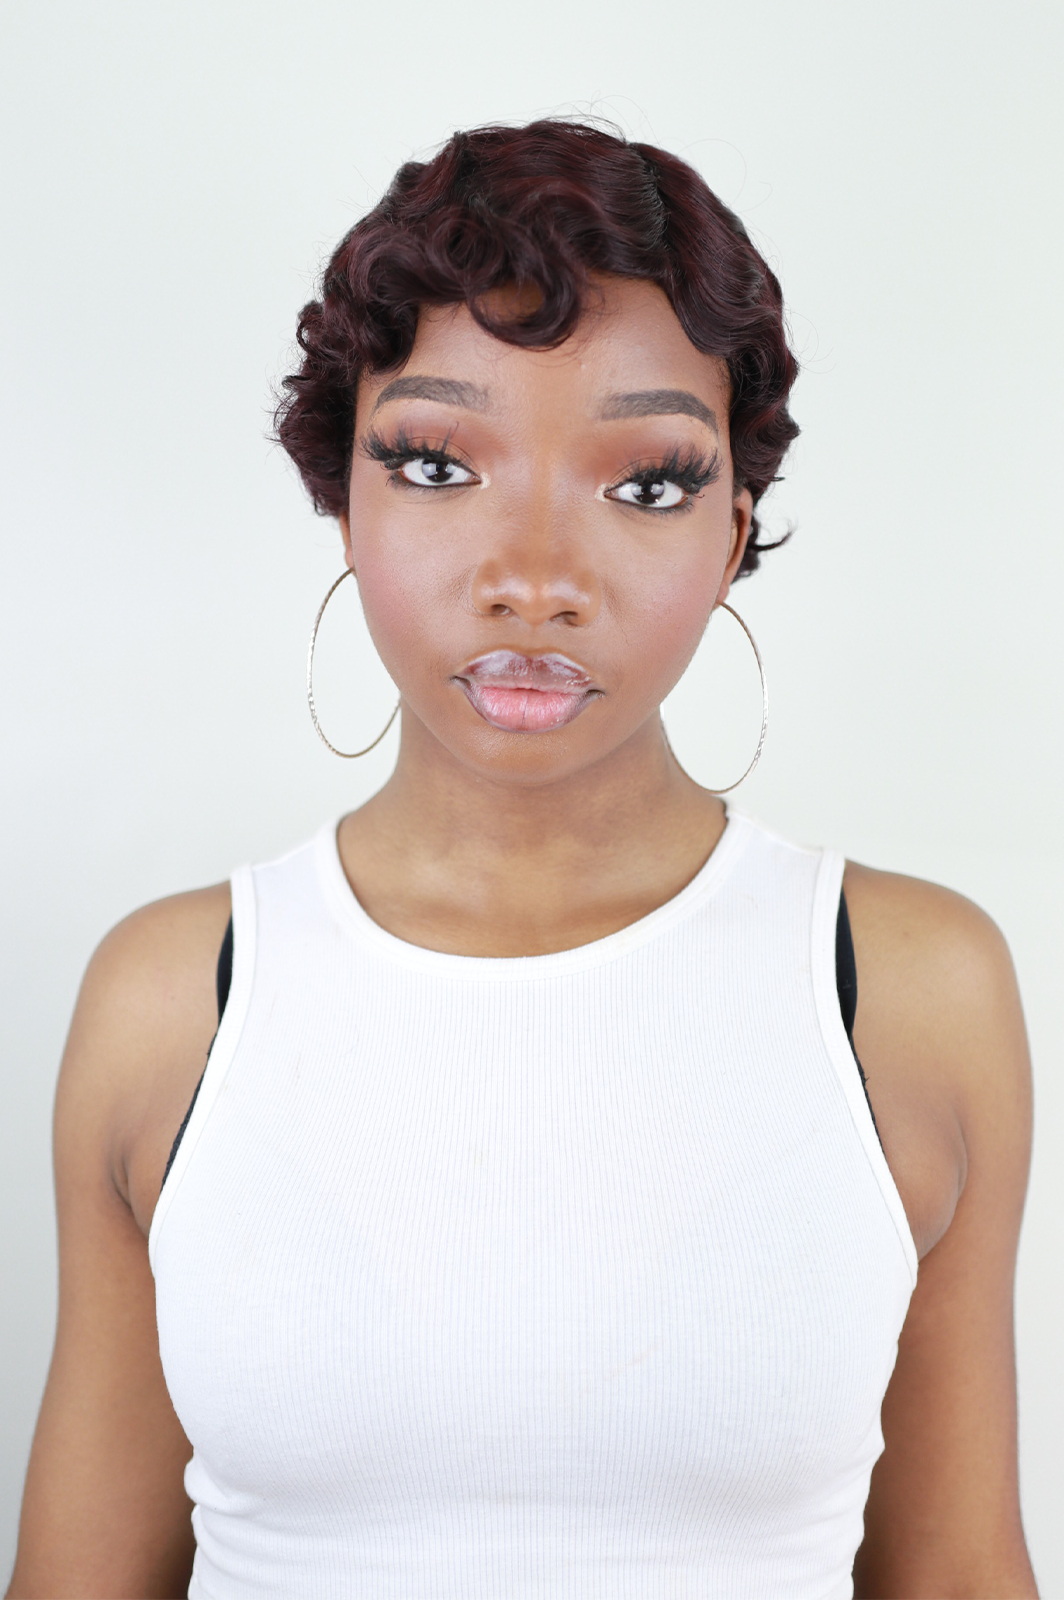 Pana Burgundy: Short Curly Heat Resistant Synthetic Fibre Wig